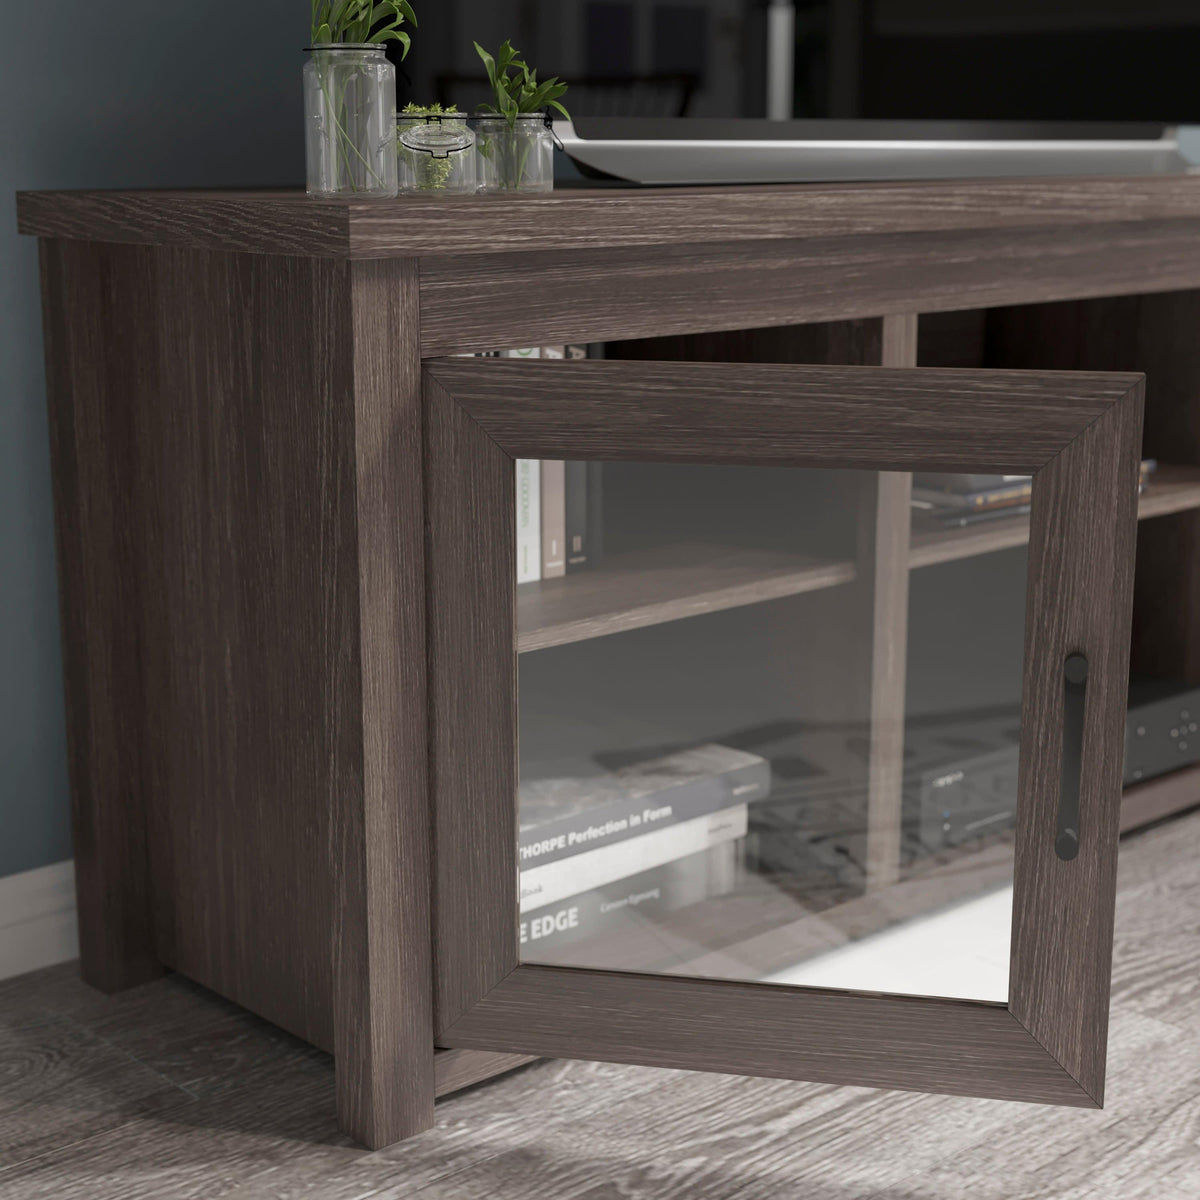 Black Wash |#| Classic TV Stand for up to 80inch TVs-Glass Fronted Doors-Modern Black Wash Finish